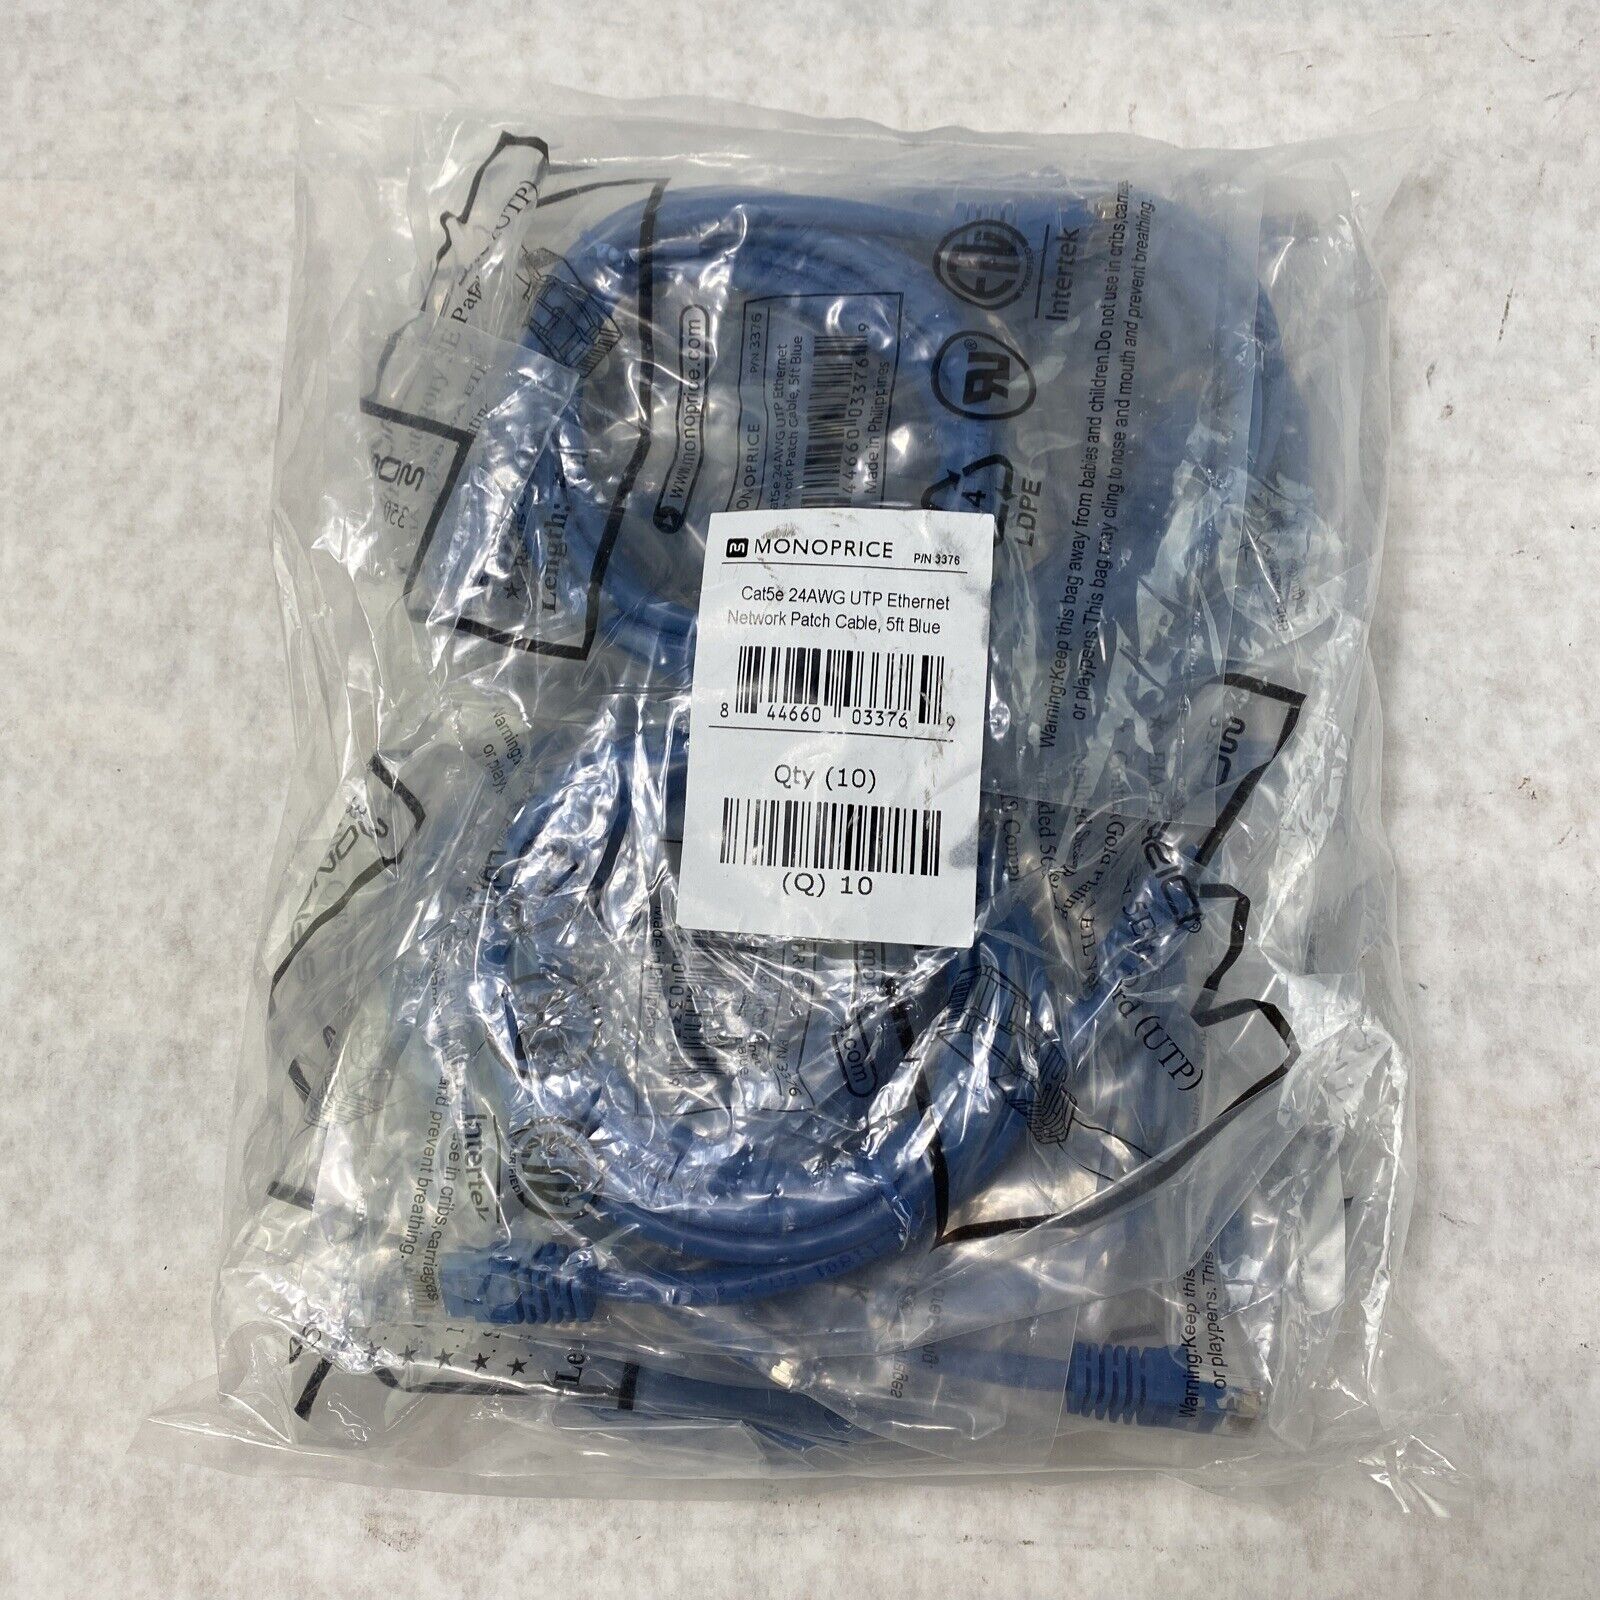 Lot of 10 Monoprice 5ft 24AWG Cat5e 350MHz UTP Ethernet network cables Blue